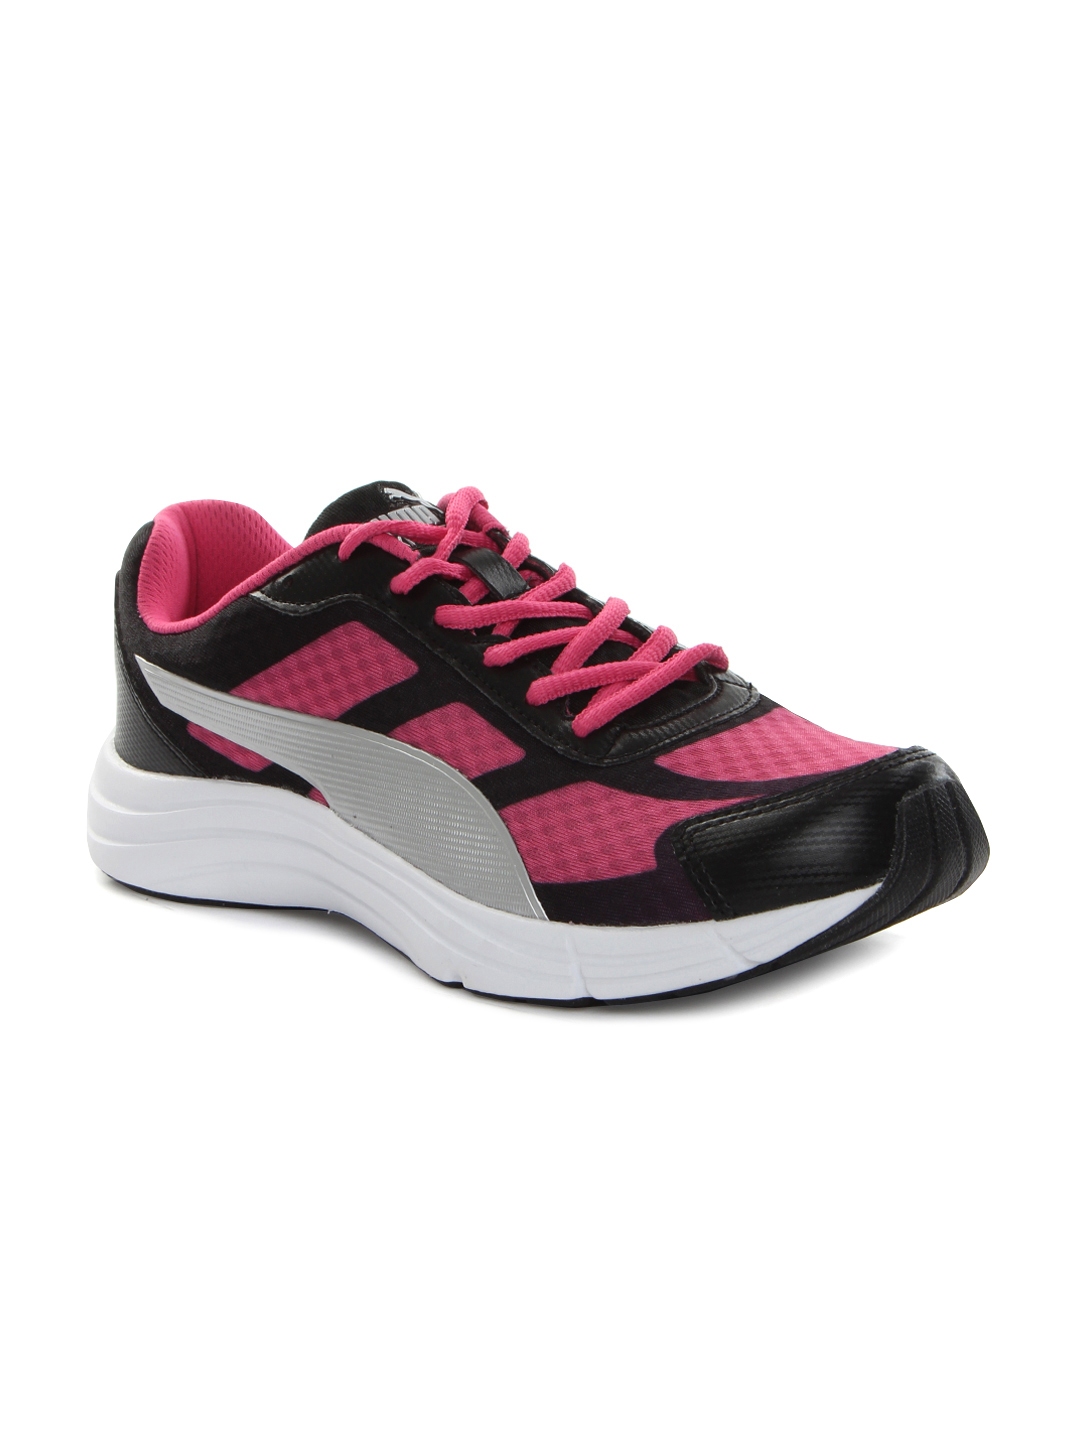 Buy Puma Women Black & Pink Expedite Running Shoes - Sports Shoes for ...